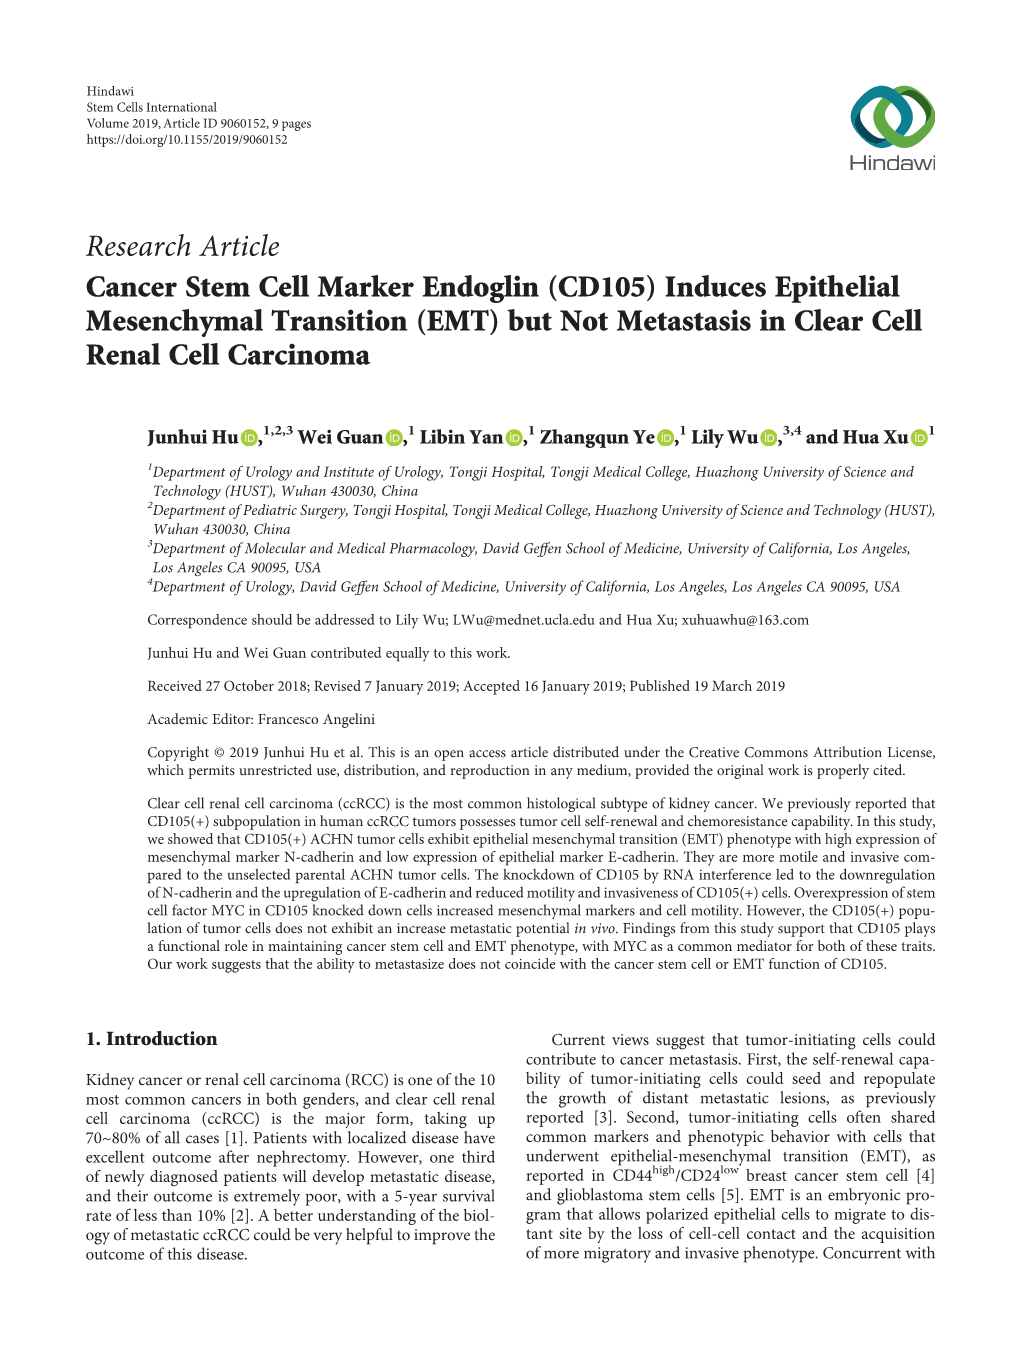 Research Article Cancer Stem Cell Marker Endoglin (CD105) Induces Epithelial Mesenchymal Transition (EMT) but Not Metastasis in Clear Cell Renal Cell Carcinoma